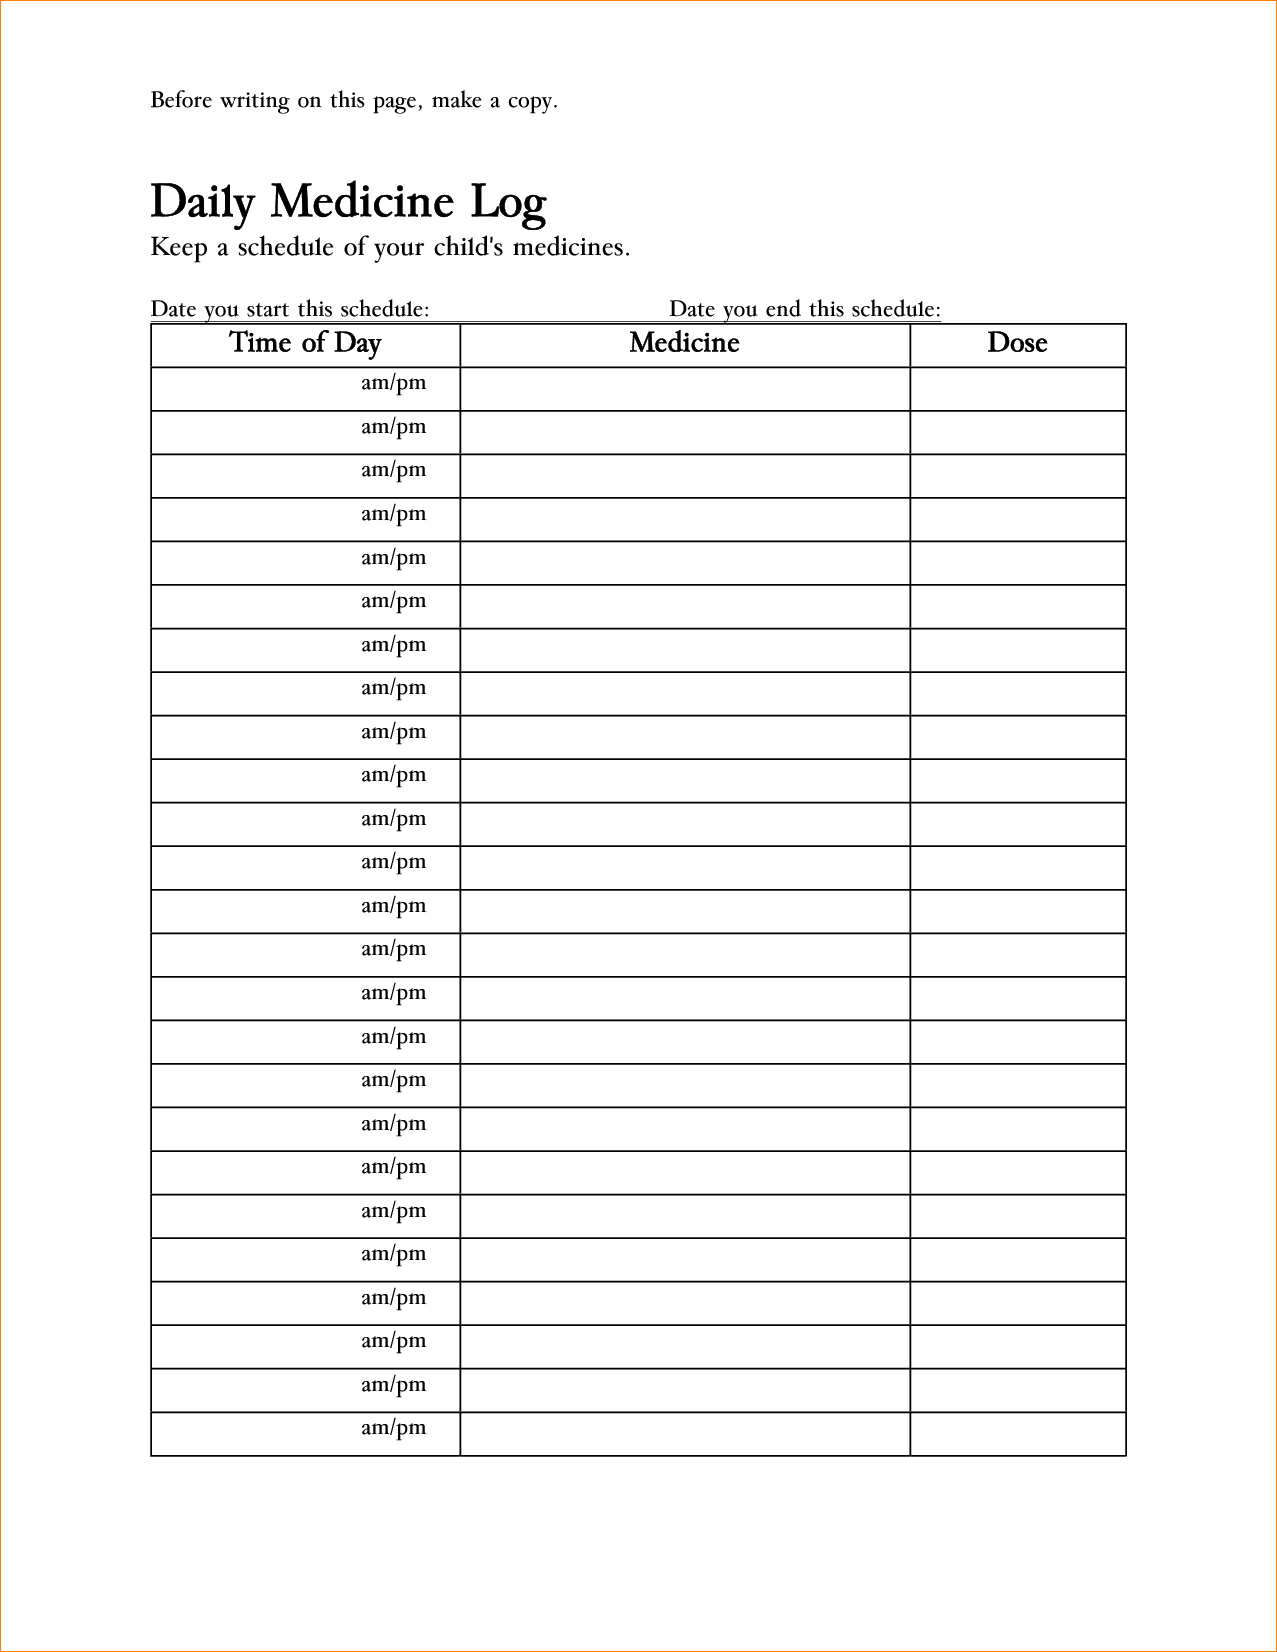 Free Medication Administration Record Template Excel - Yahoo Image - Free Printable Caregiver Forms